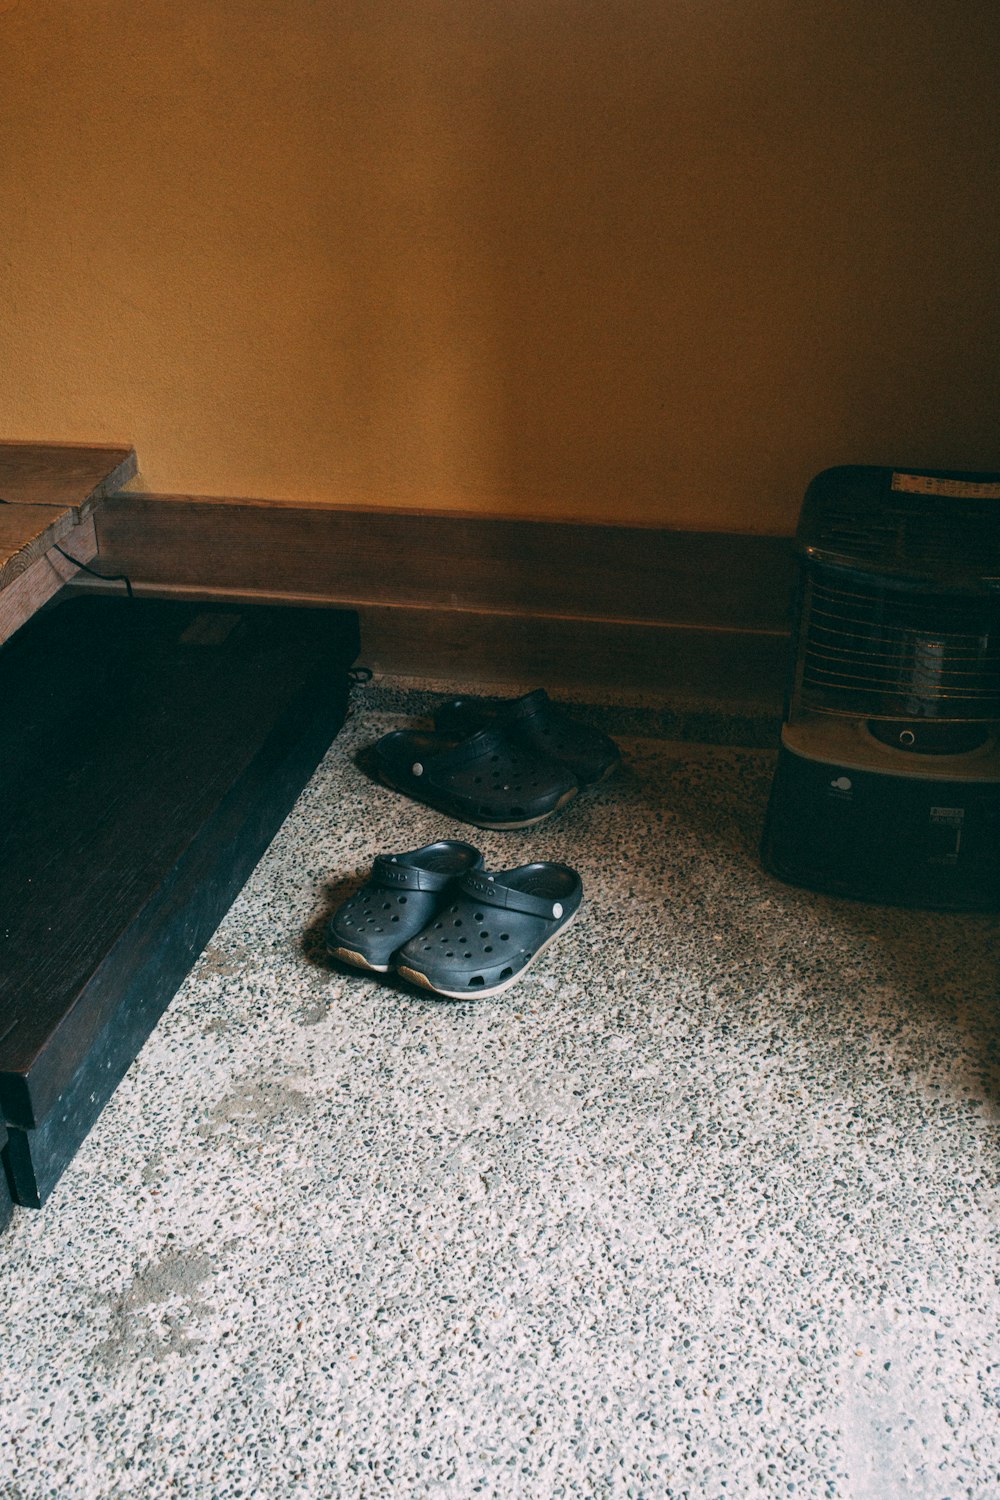 a pair of shoes sitting on the floor next to a heater